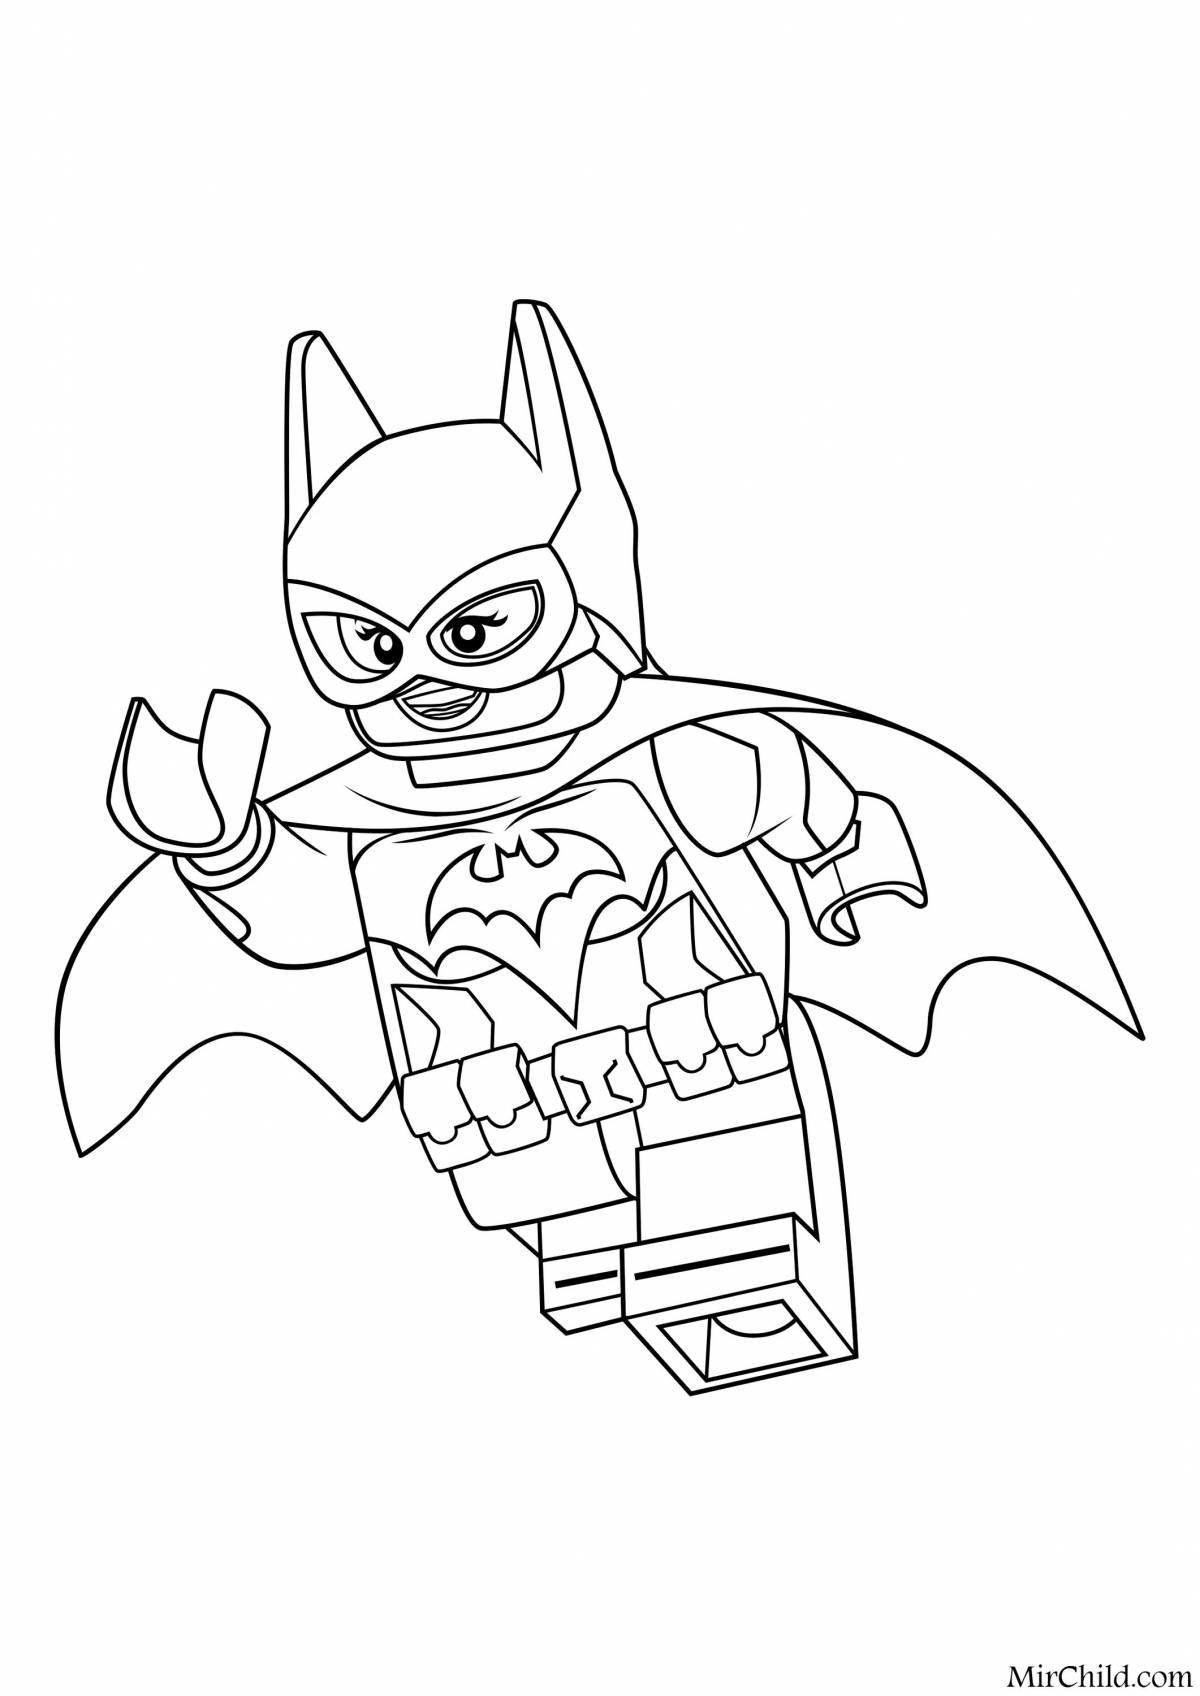 Coloring bright lego heroes